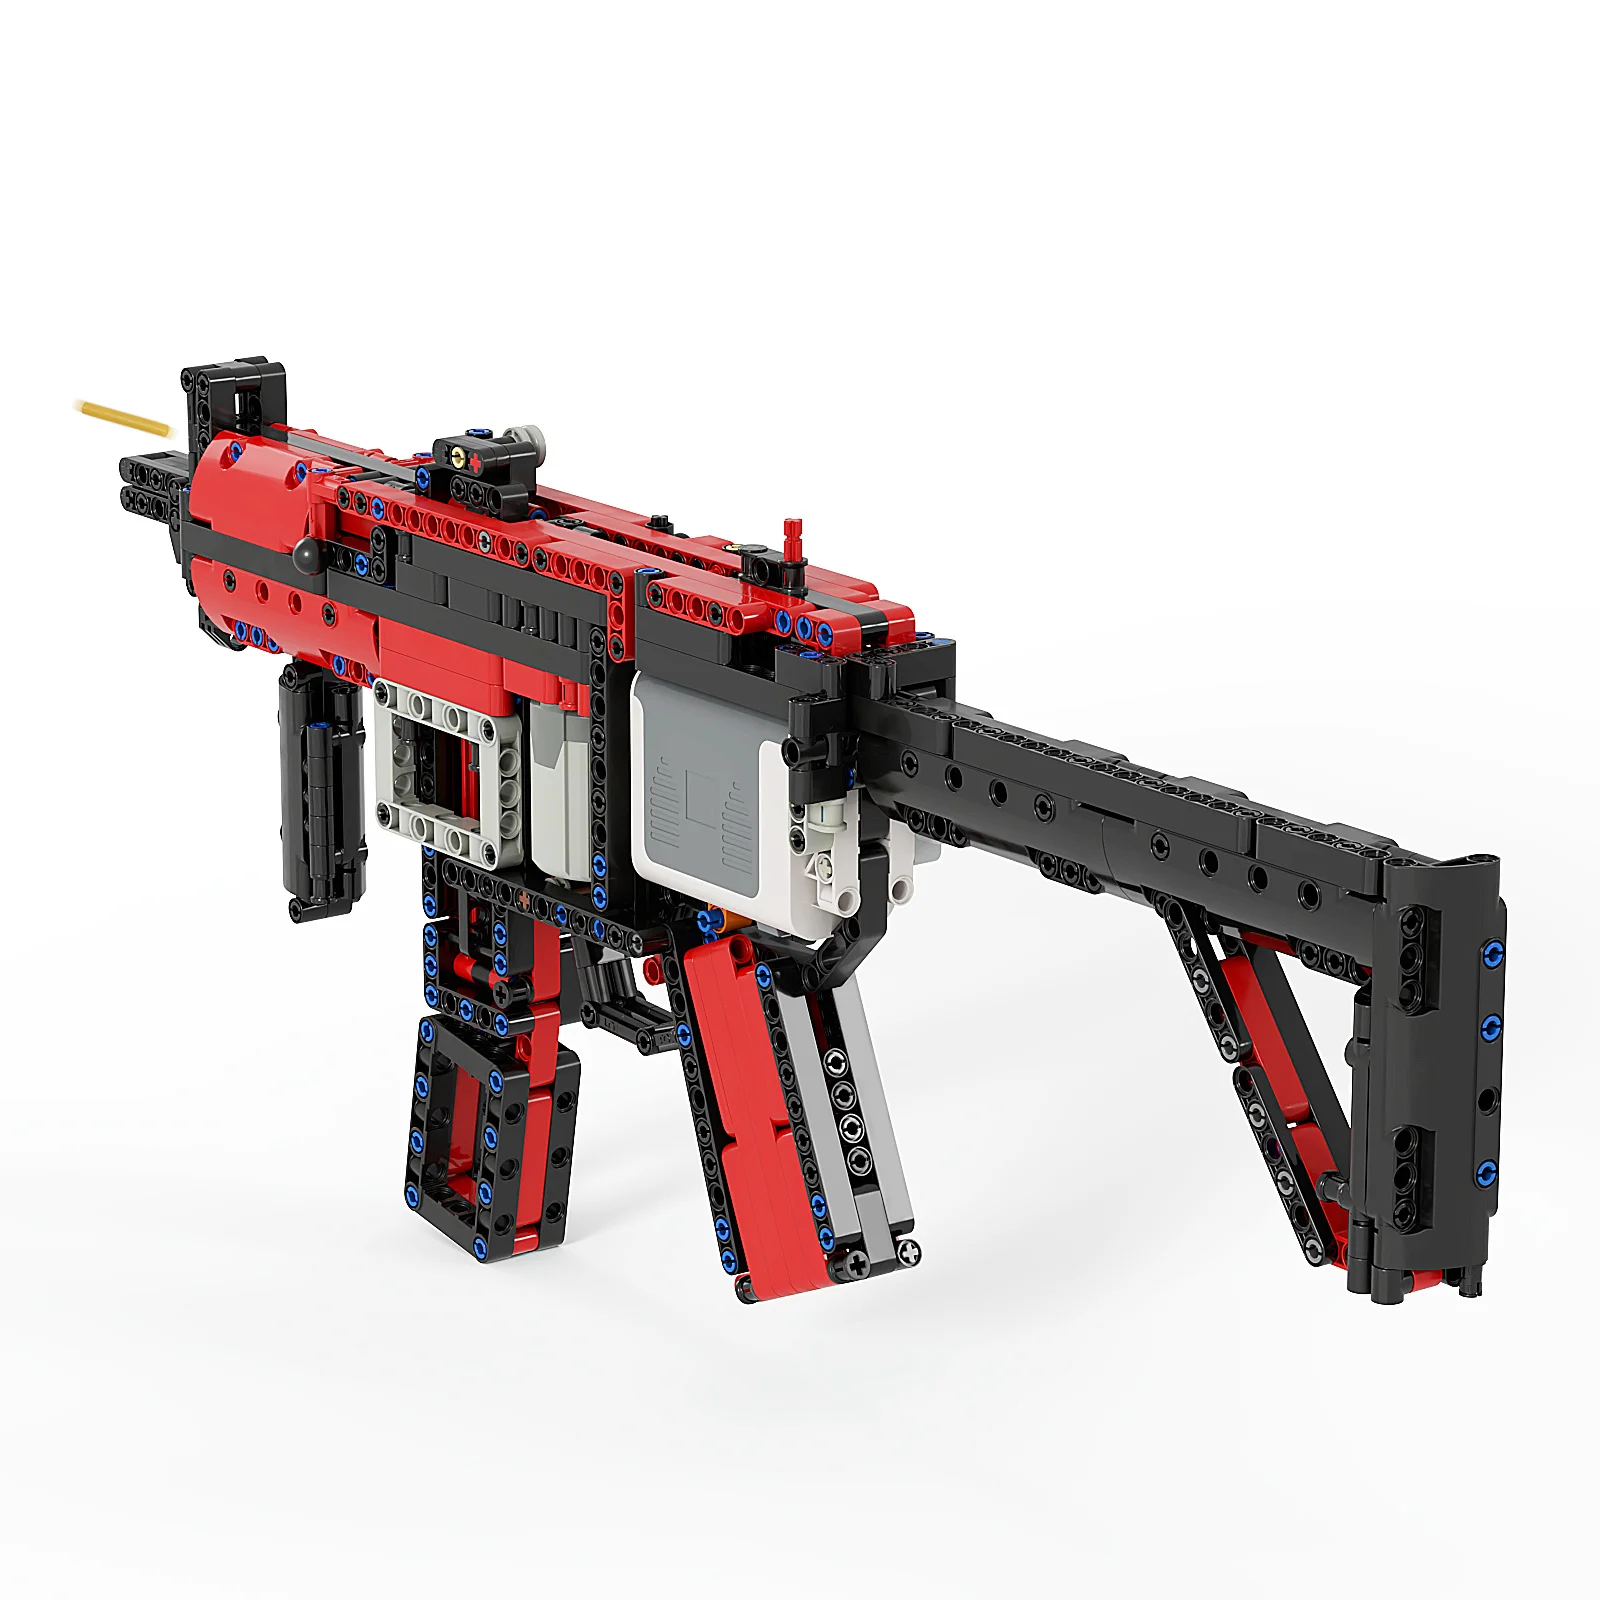 Black SMG Pistol compatible with toy brick minifigures Army SWAT MP9 W159 